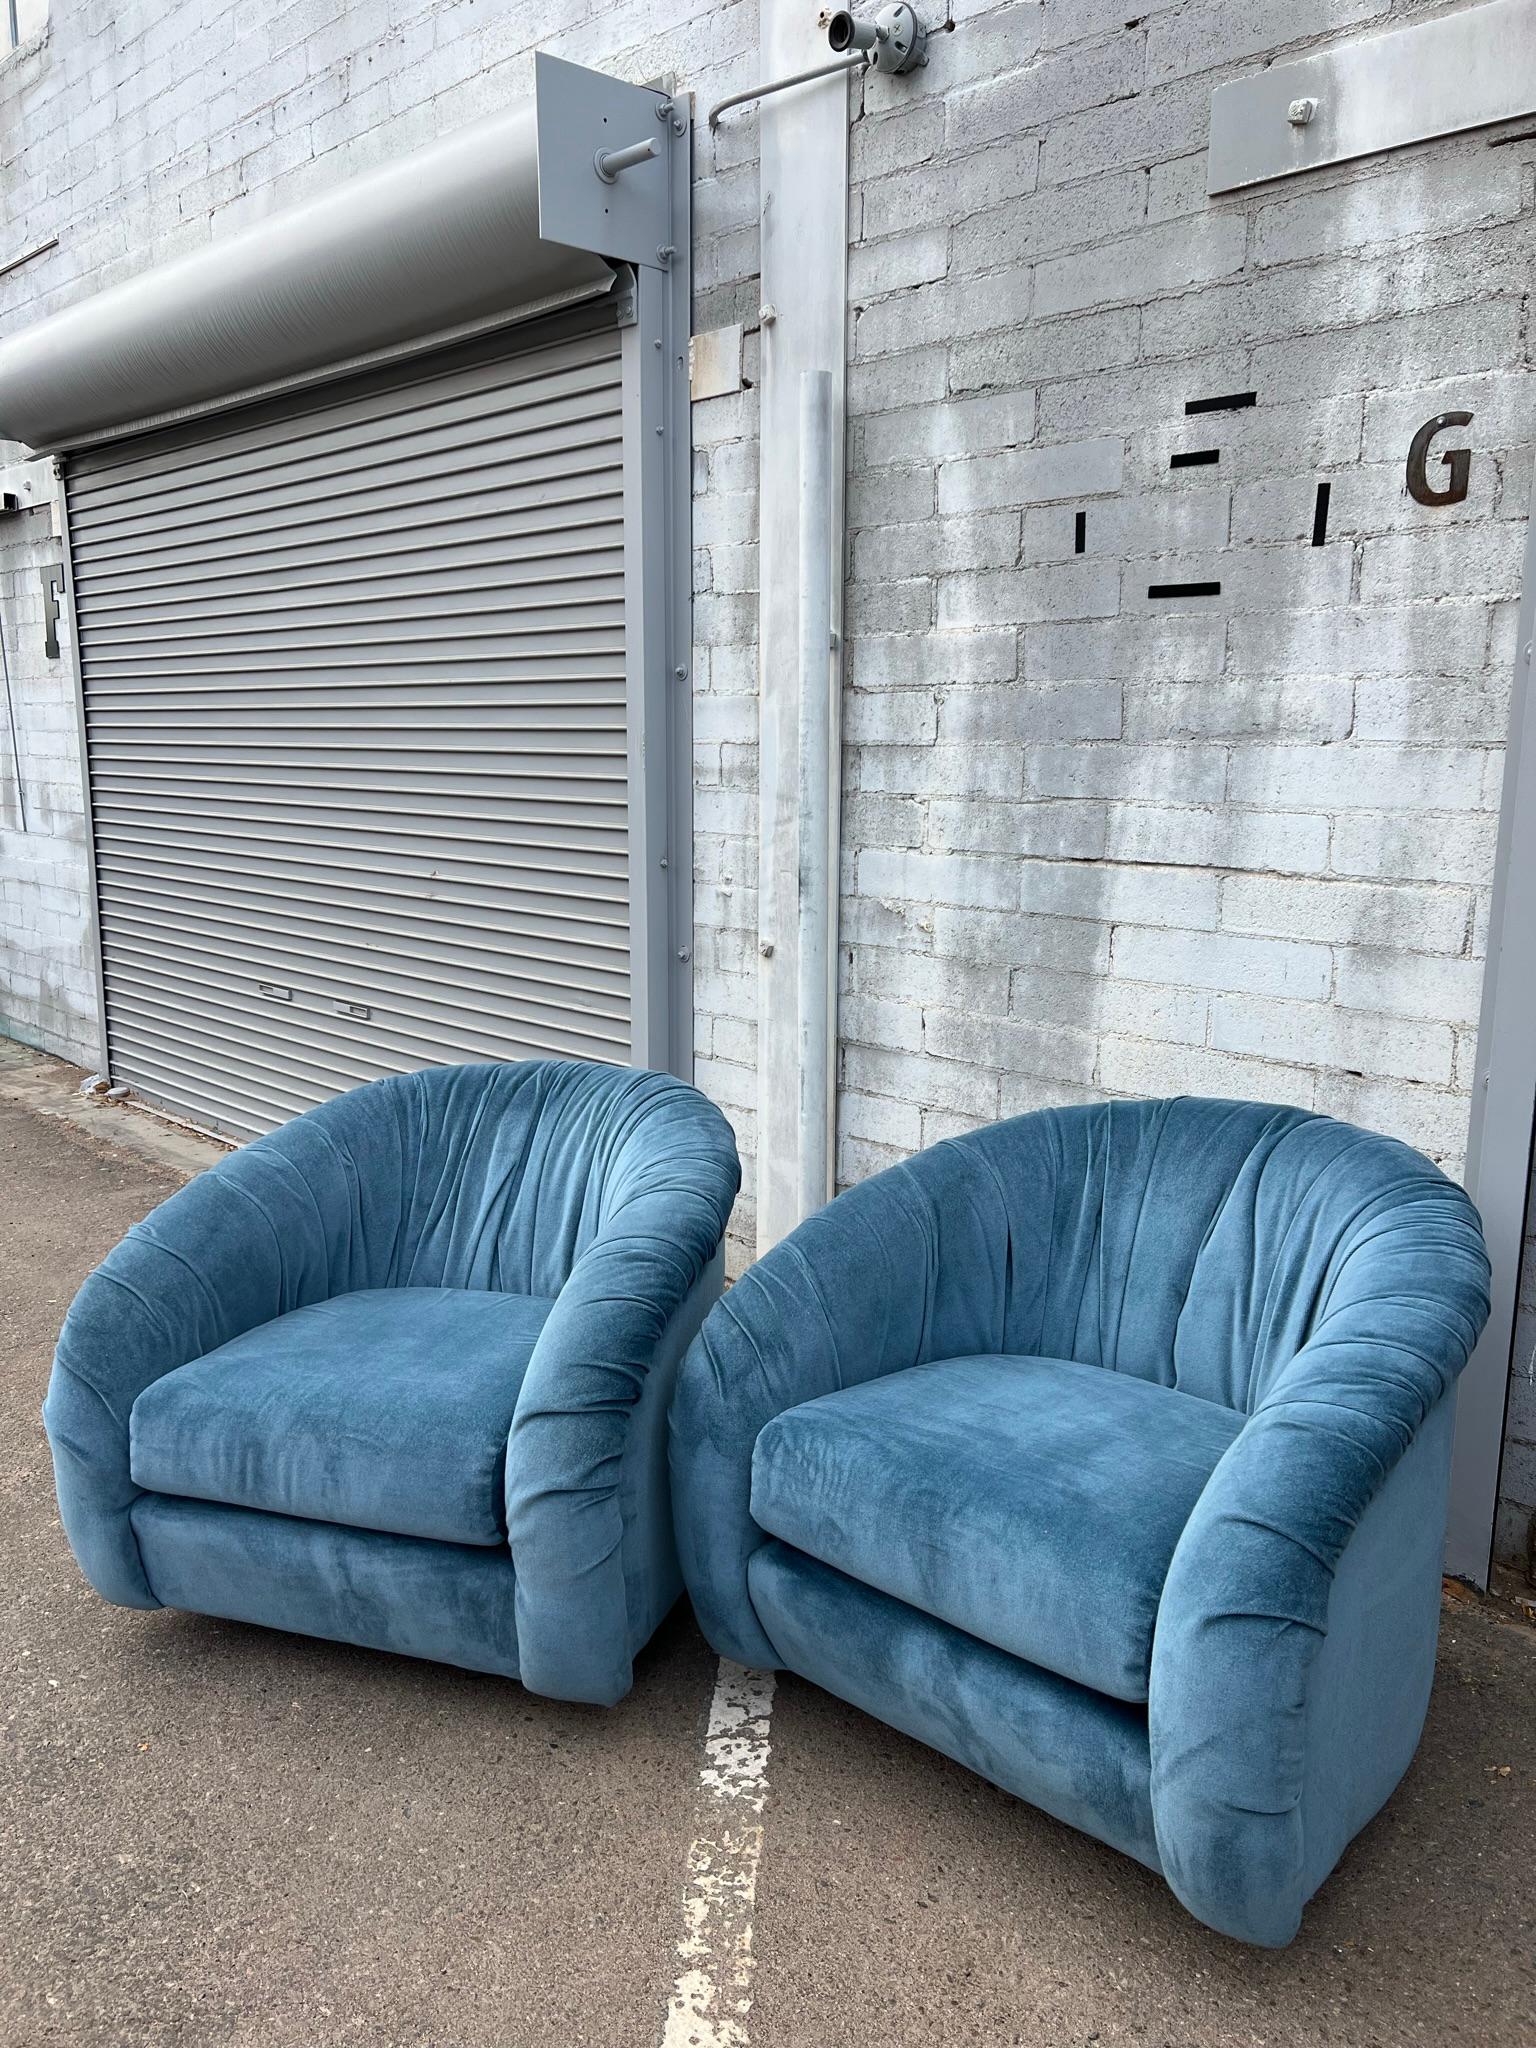 Seeing double. Pair of ridiculously comfortable vintage swiveling lounge chairs in blue velvet. Attributed to Milo Baughman for Directional. Ruched 360° seat backs with plush cushions. They both rock and swivel. 

These are the perfect functional